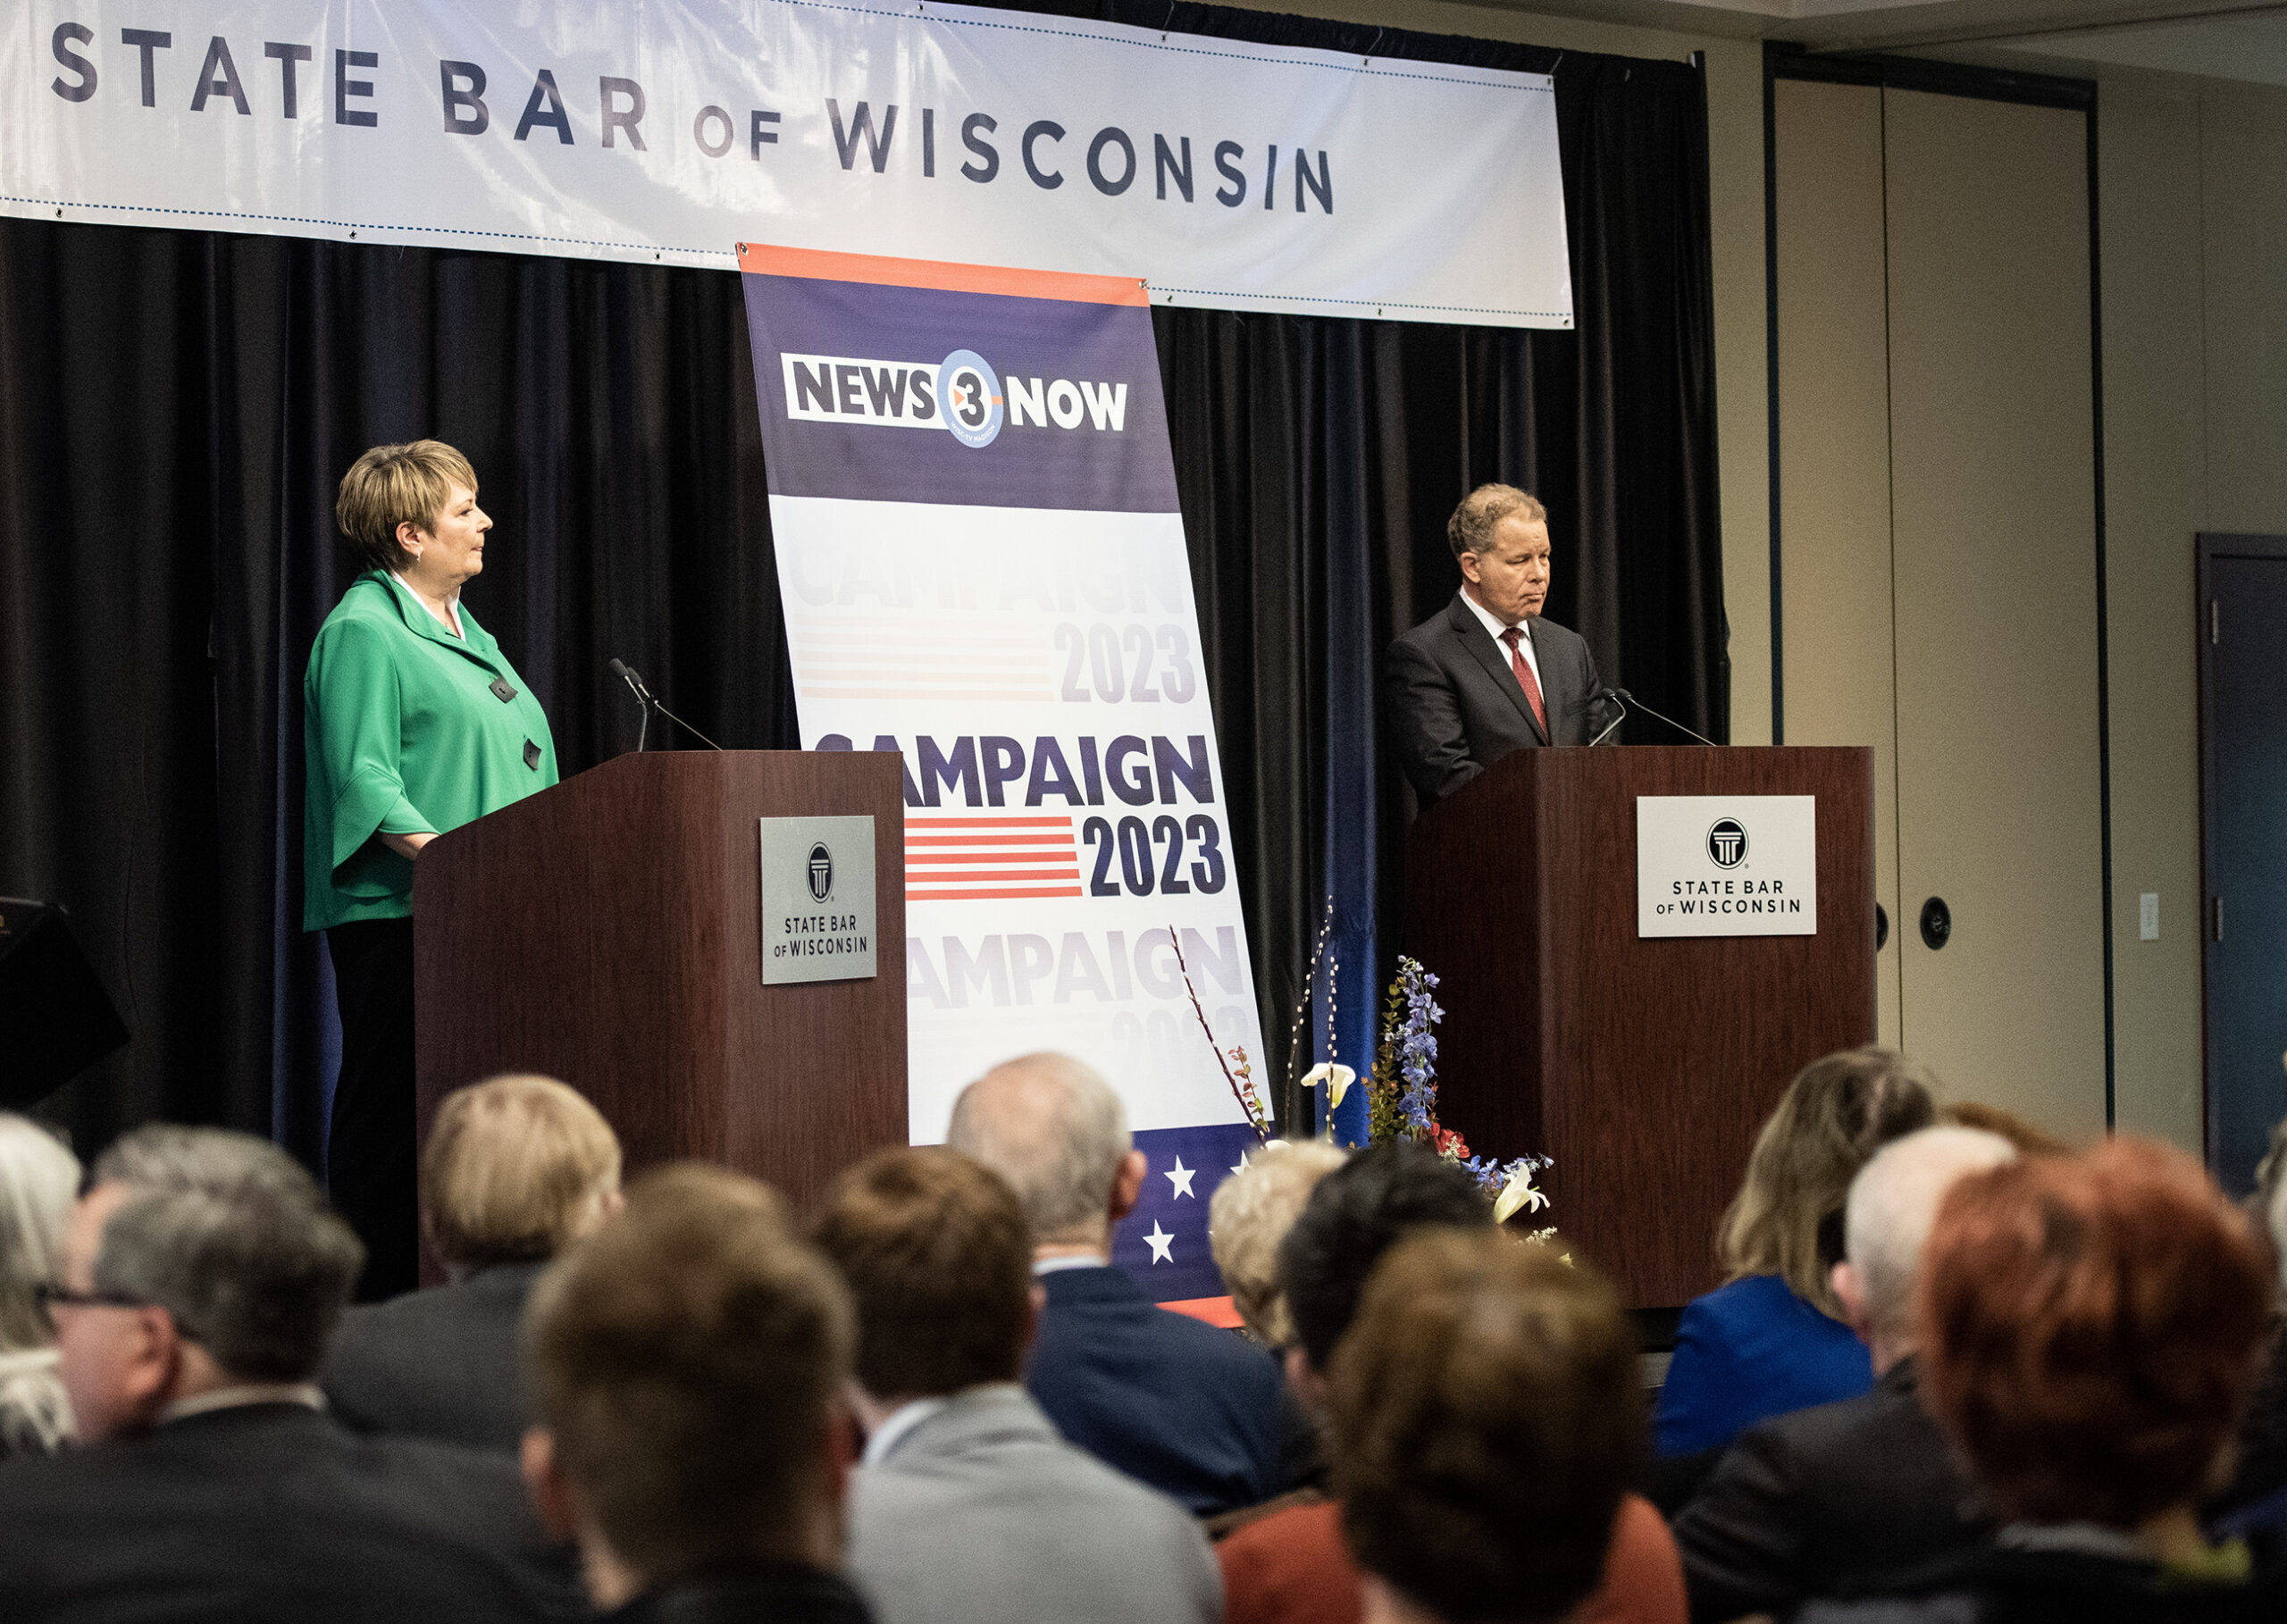 The two candidates stand at podiums on stage. A sign for the State Bar of Wisconsin hangs behind them.